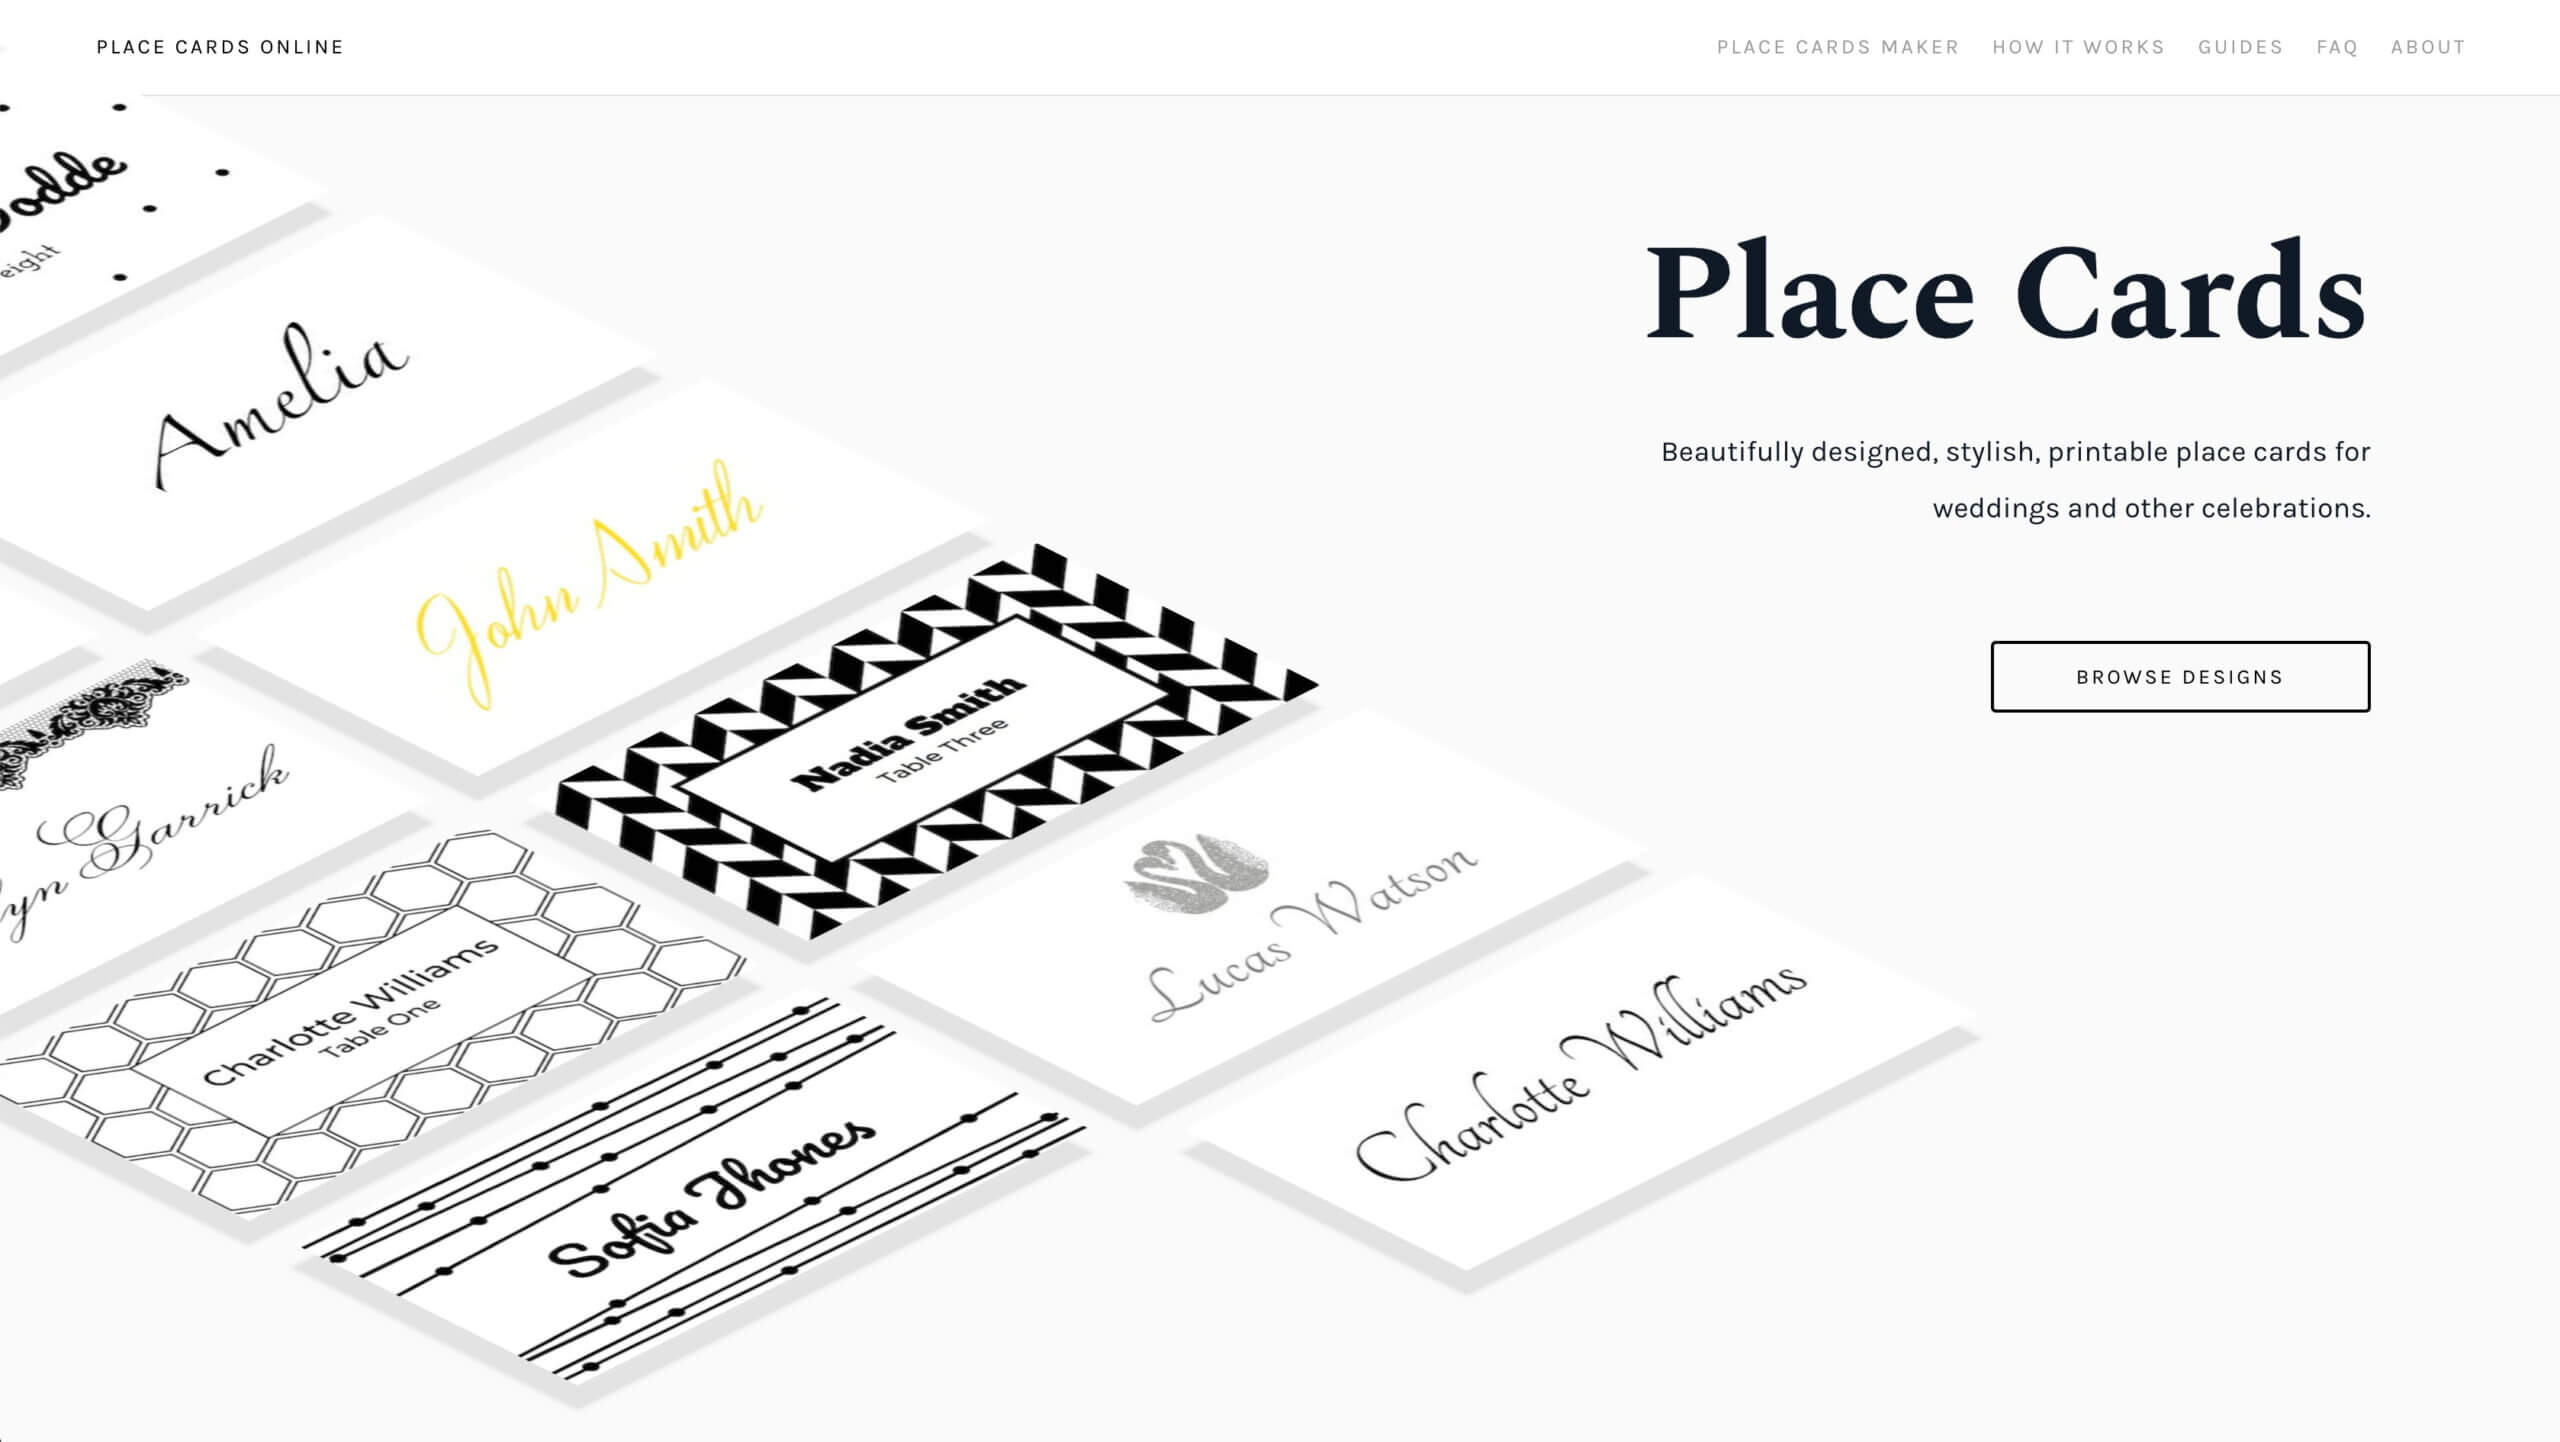 Place Cards Online - Place Cards Maker. Beautifully Designed Regarding Celebrate It Templates Place Cards